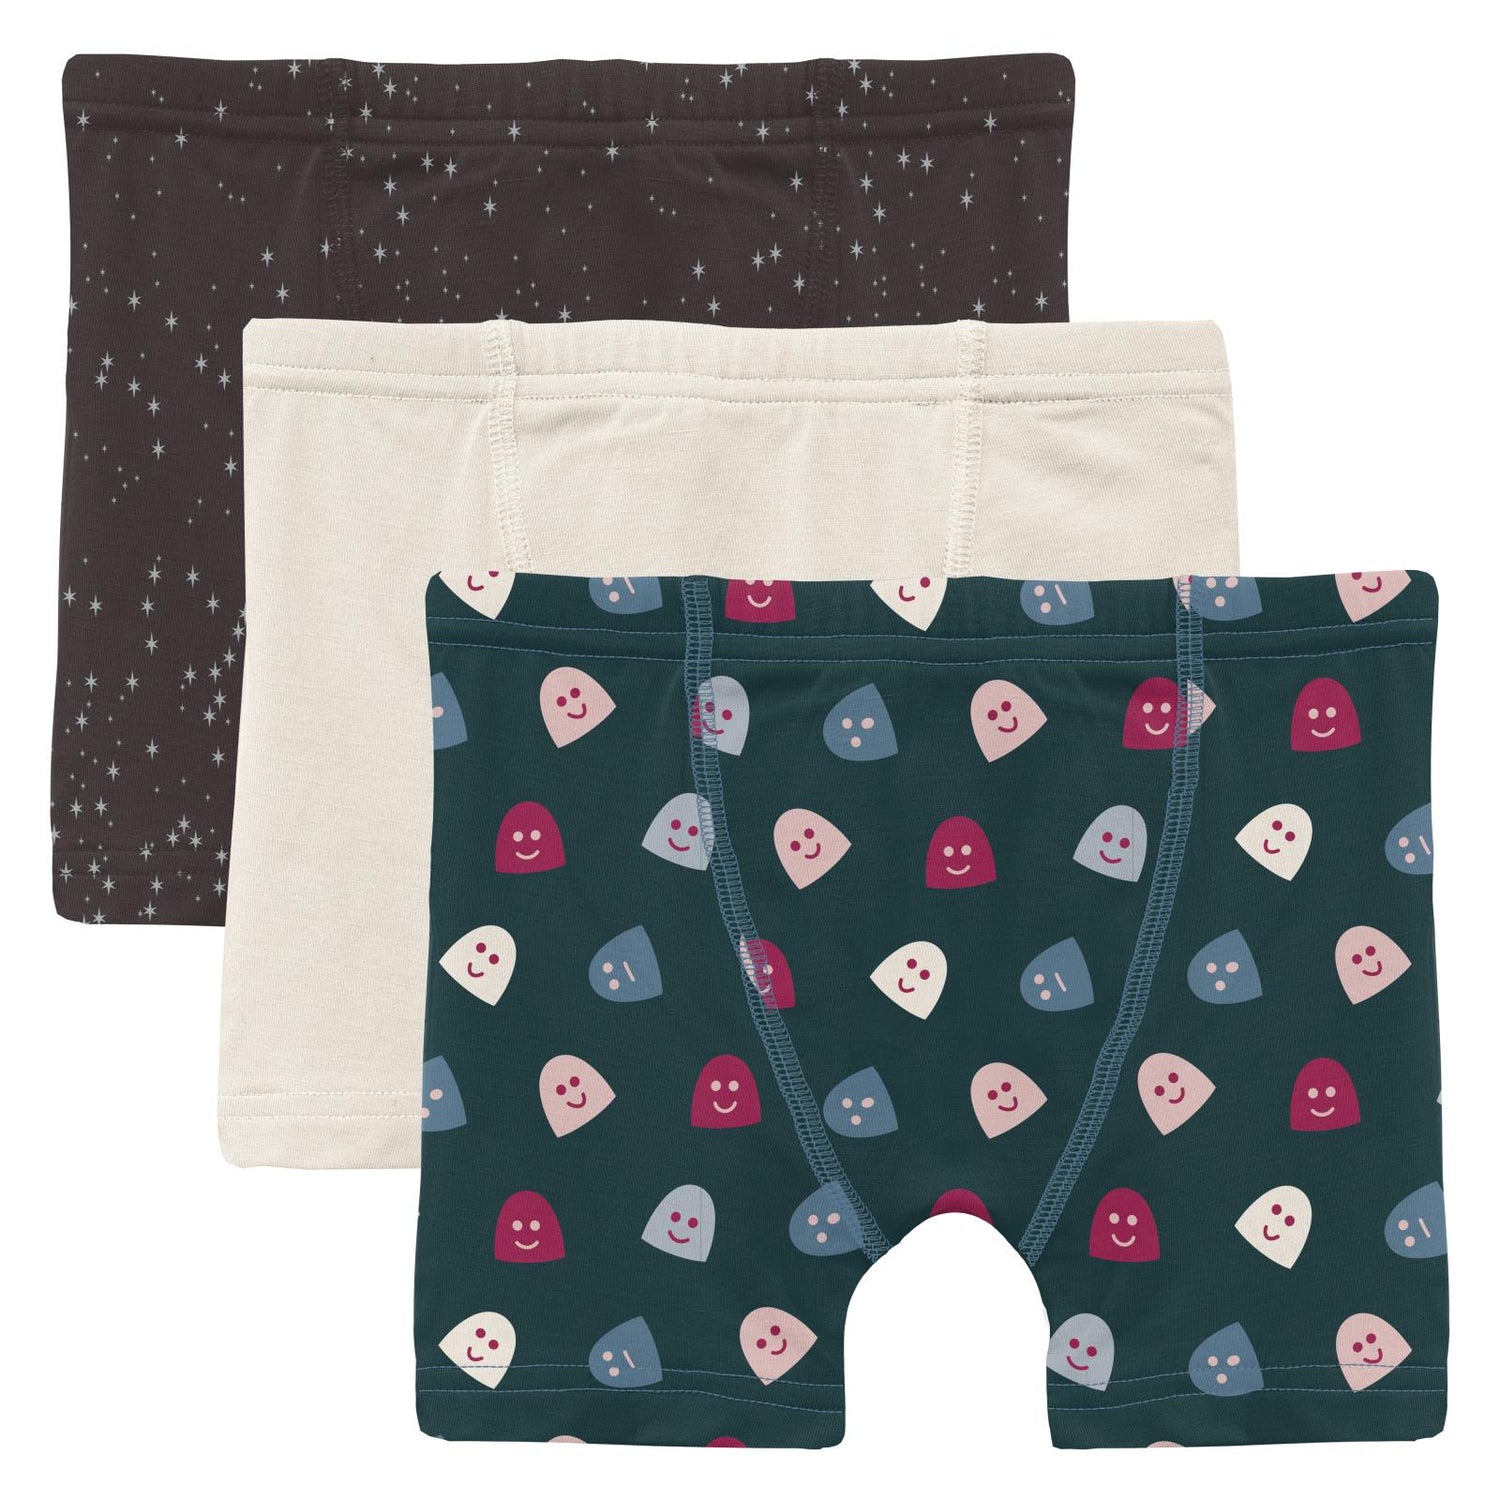 Print Boxer Brief Set of 3 in Midnight Foil Constellations, Natural & Pine Happy Gumdrops